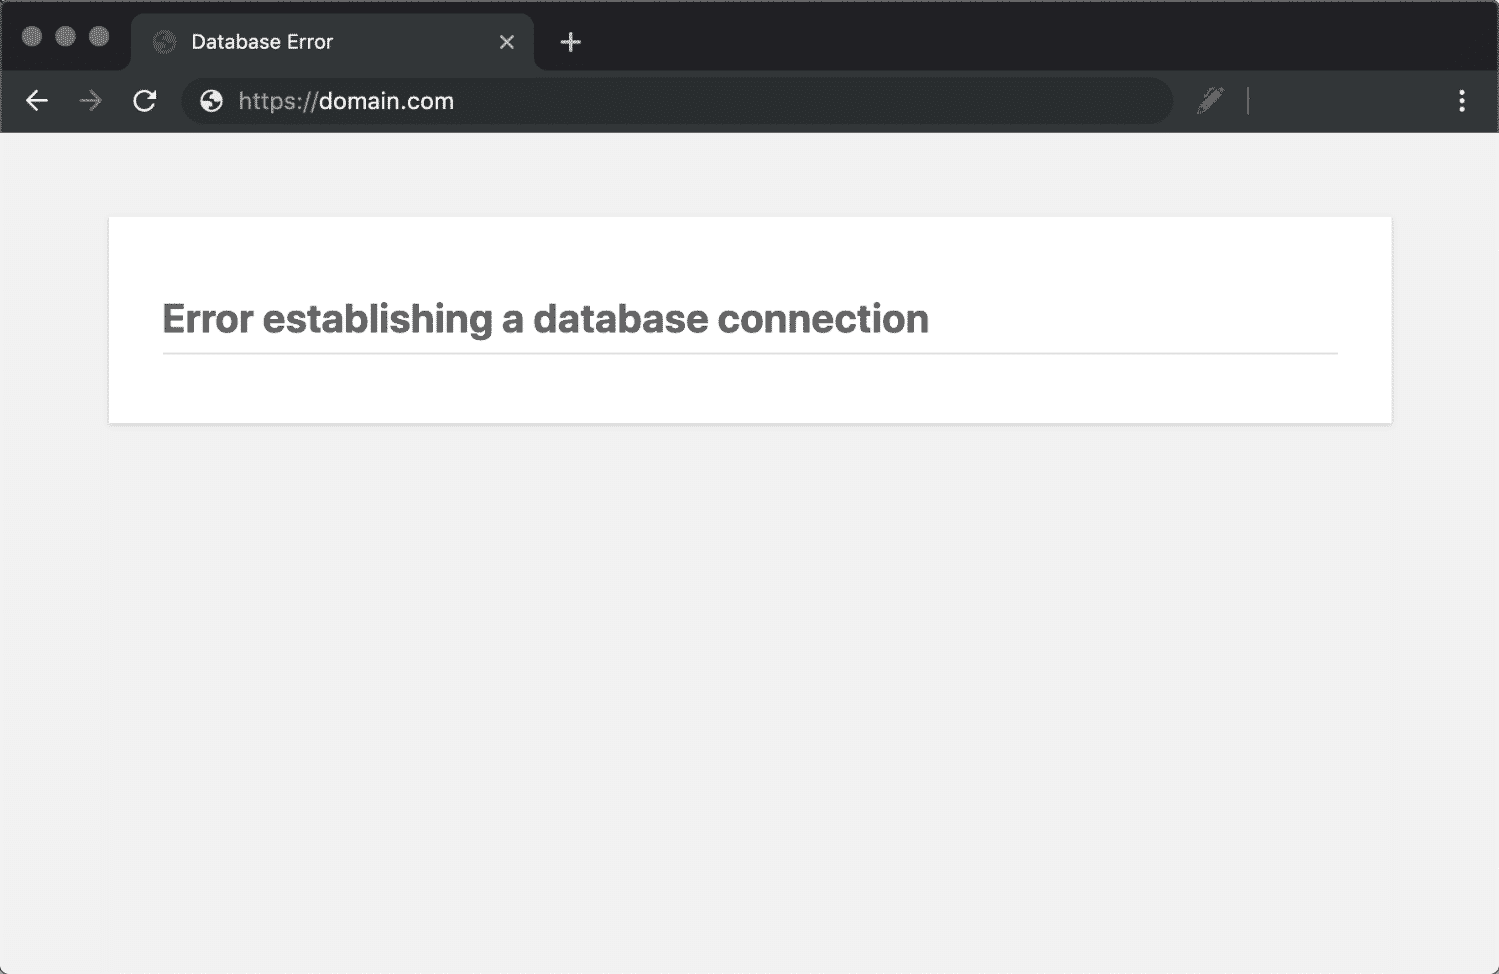 The Error establishing a database connection message in Chrome